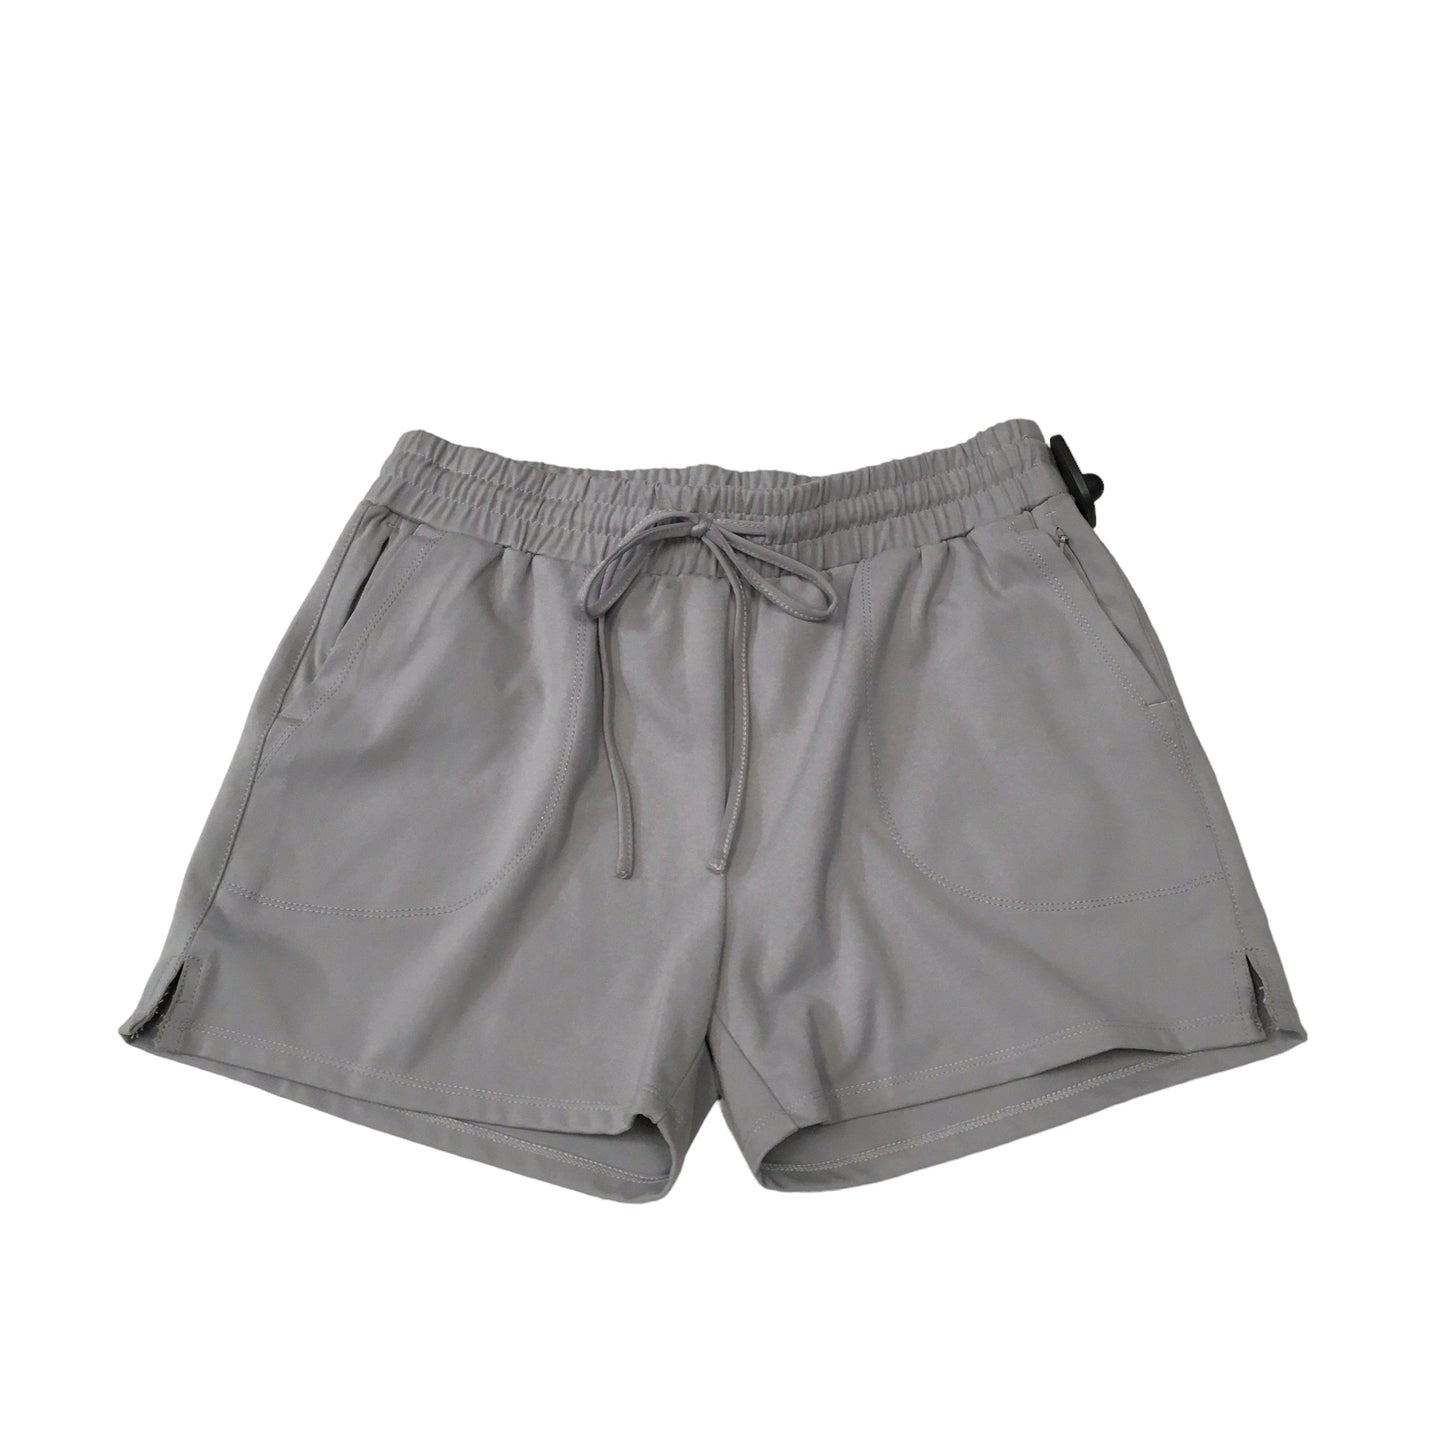 Athletic Shorts By Cynthia Rowley  Size: S